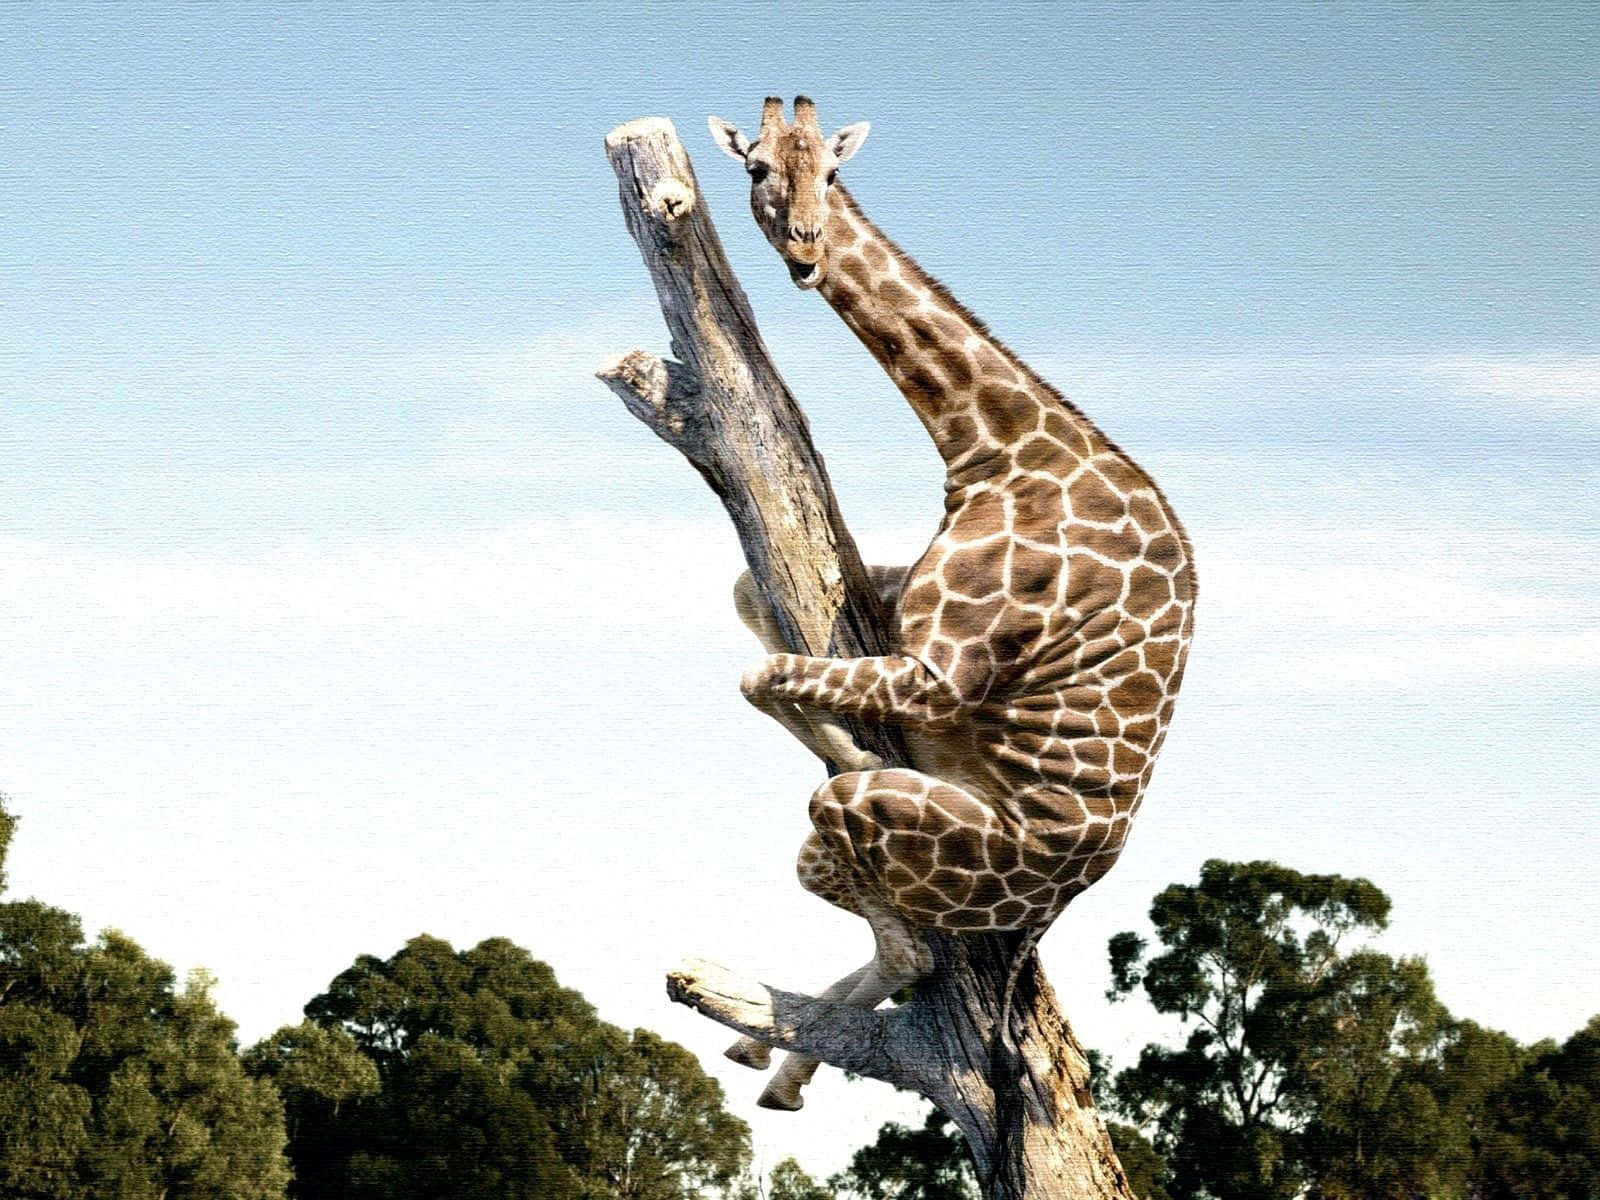 Have a laugh with this funny giraffe! Wallpaper